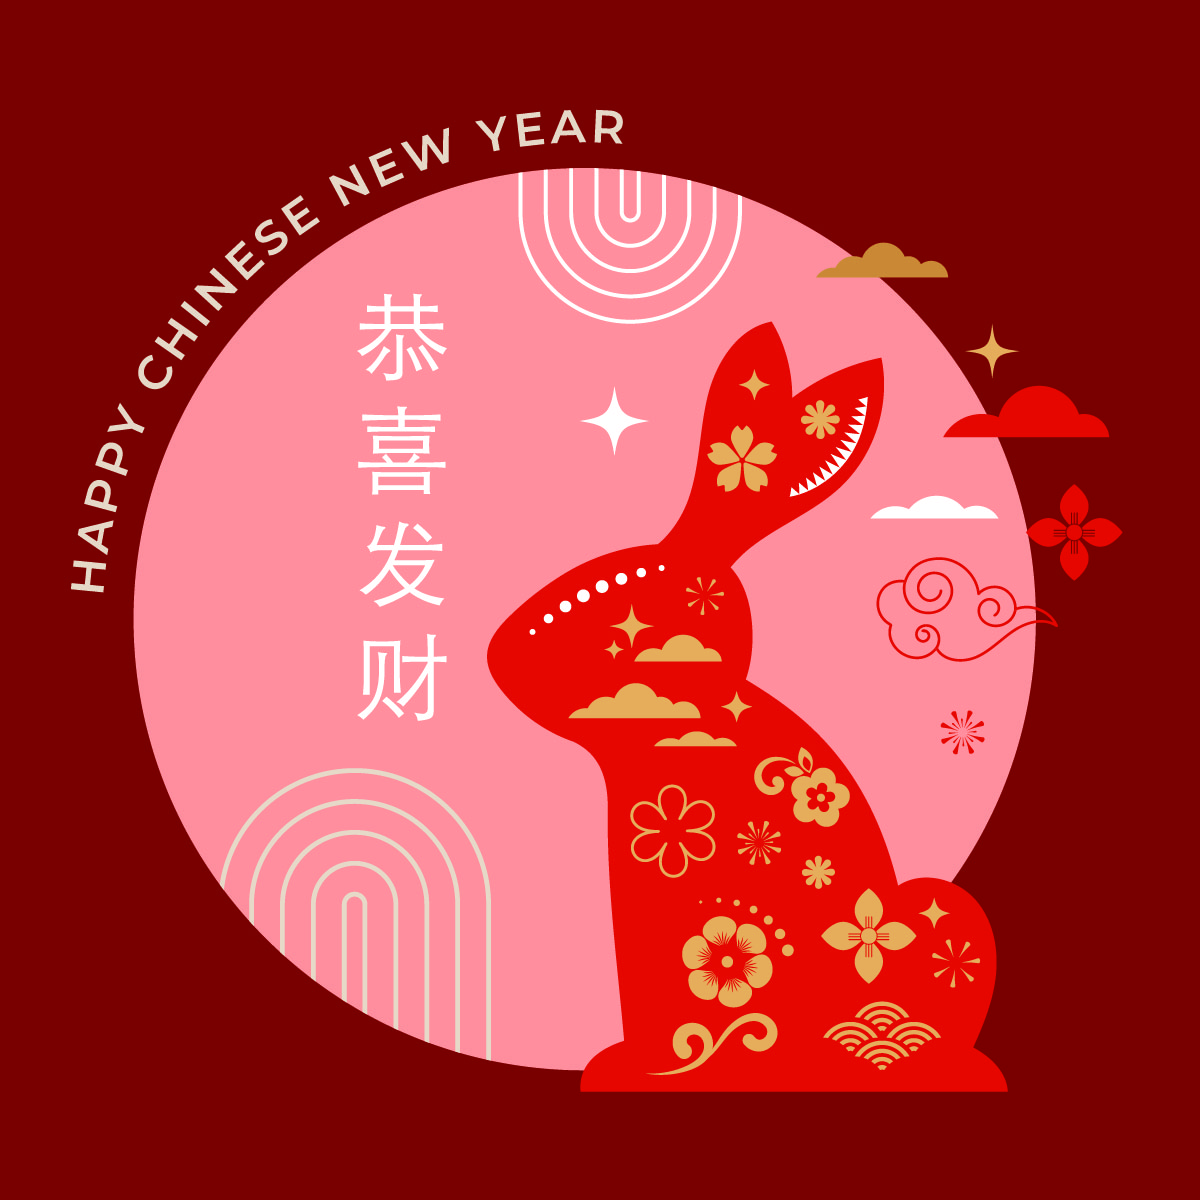 Celebrate and learn about the Lunar New Year with @wcplonline! Events take place at libraries throughout the county, with the first happening today at the Holly Springs Community Library. 🐇 DETAILS: ow.ly/nvIZ50MviEl @ToHollySprings